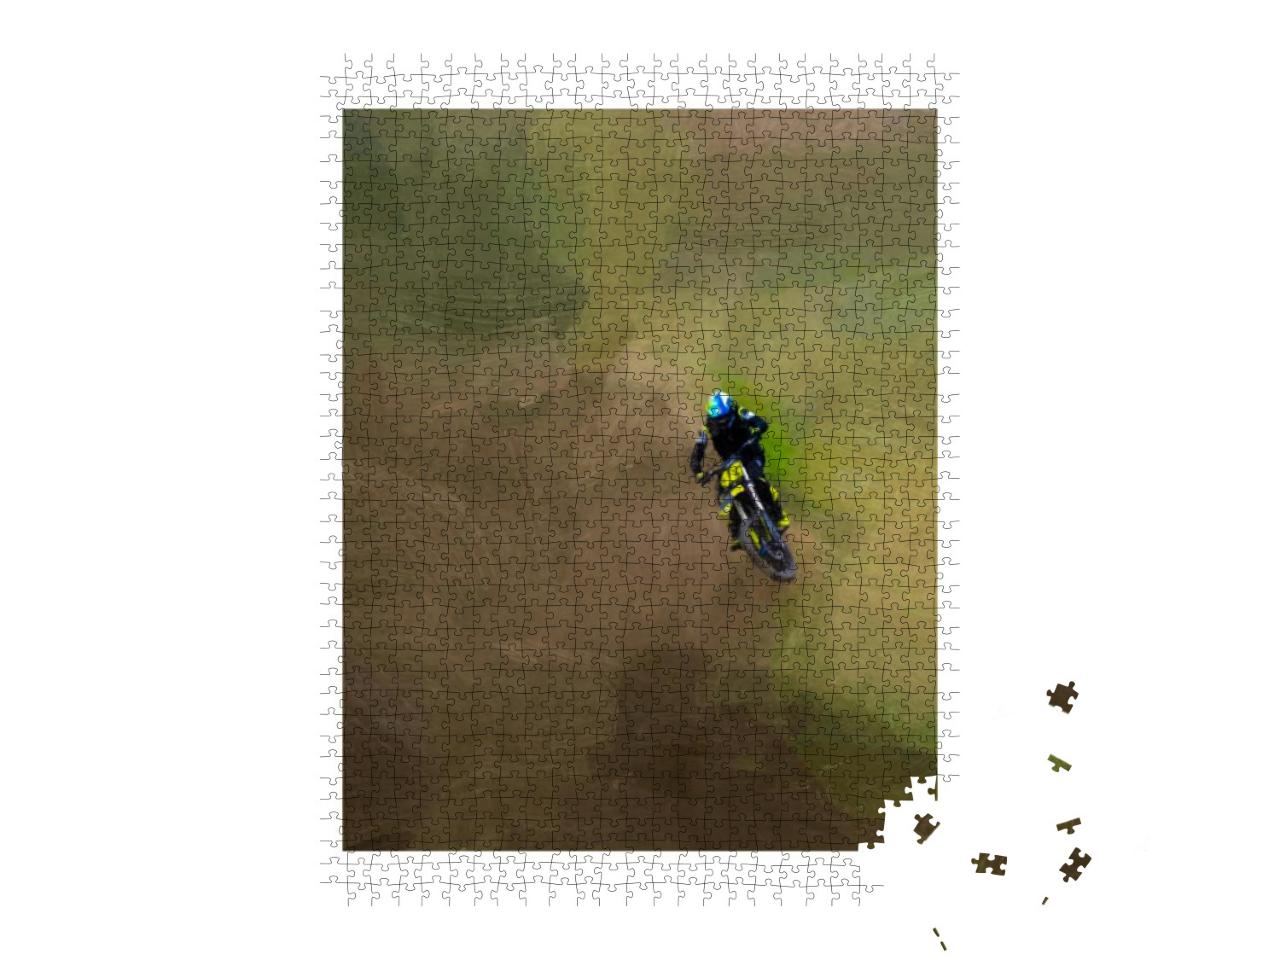 Motocross Jump in an Artistic Painting Illustrations for... Jigsaw Puzzle with 1000 pieces